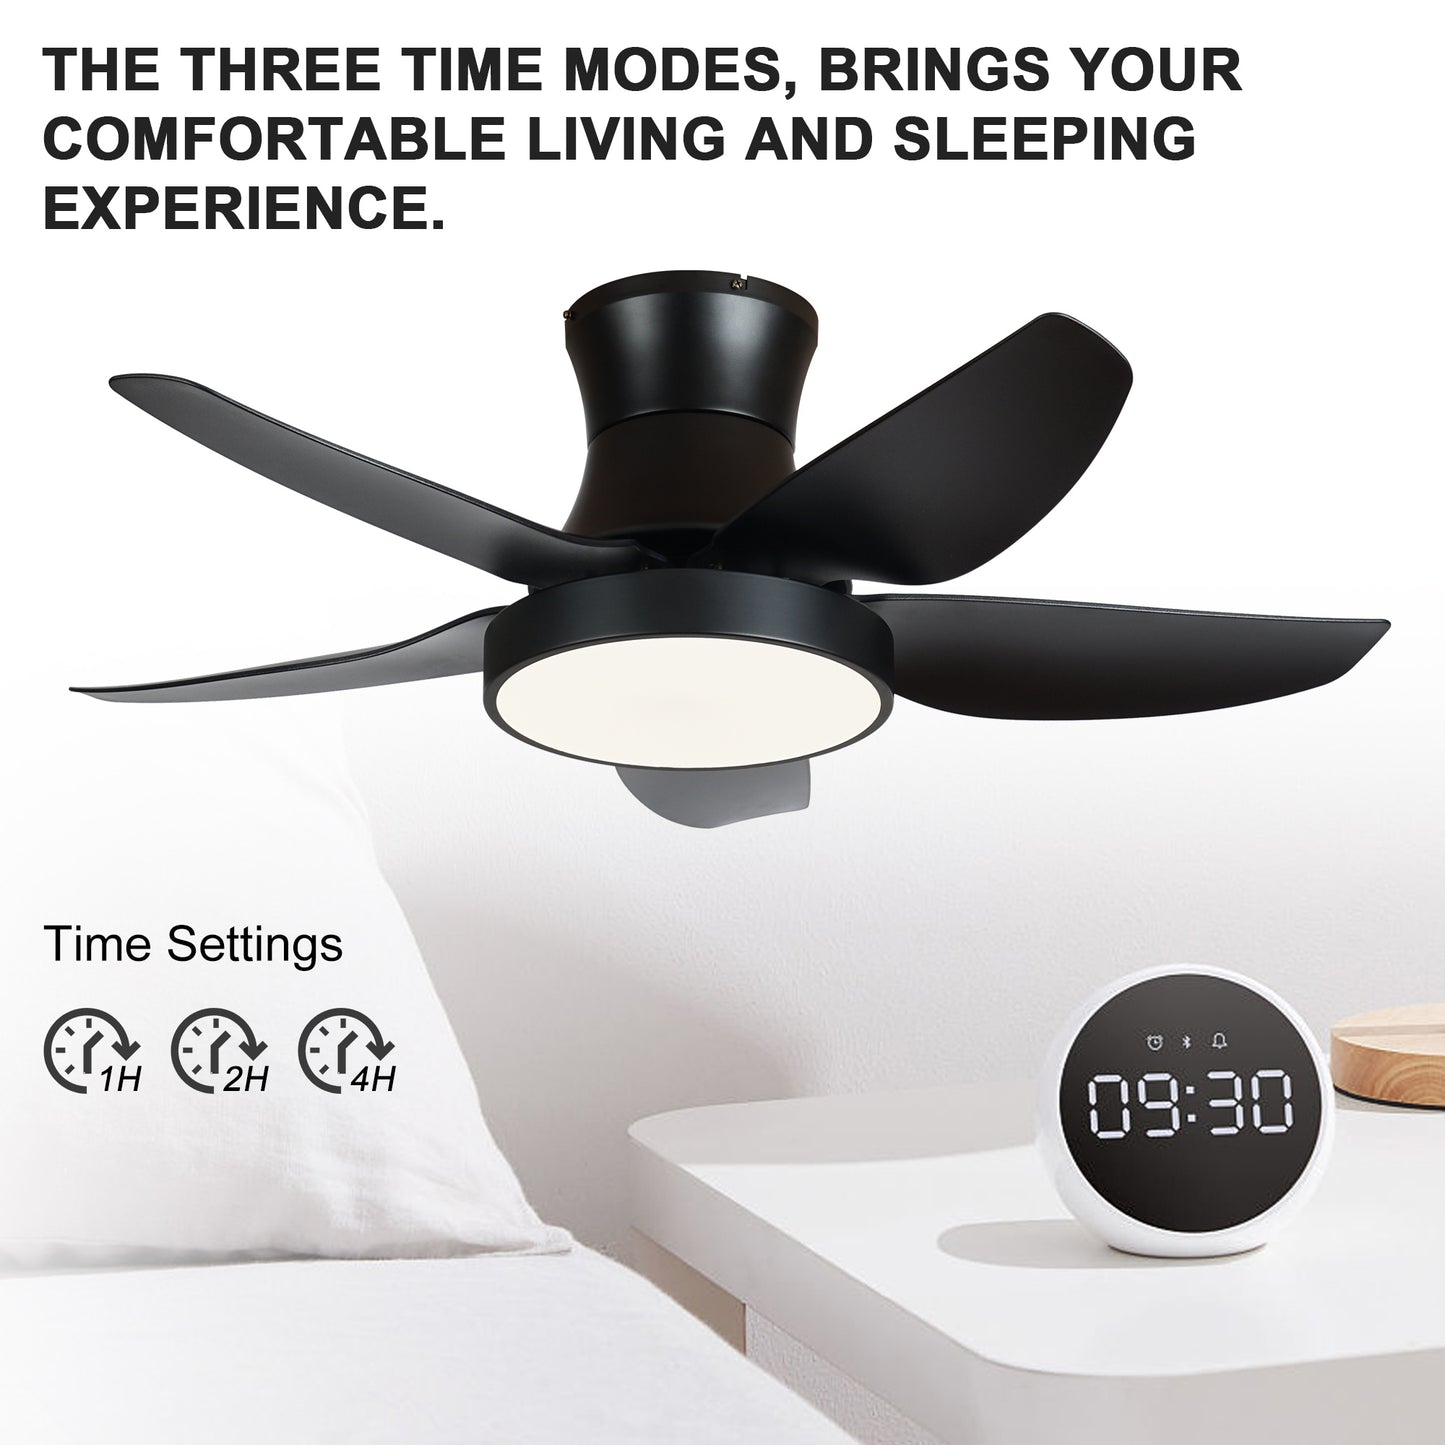 42 Inch Black Ceiling Fan with LED Lights and Remote Control